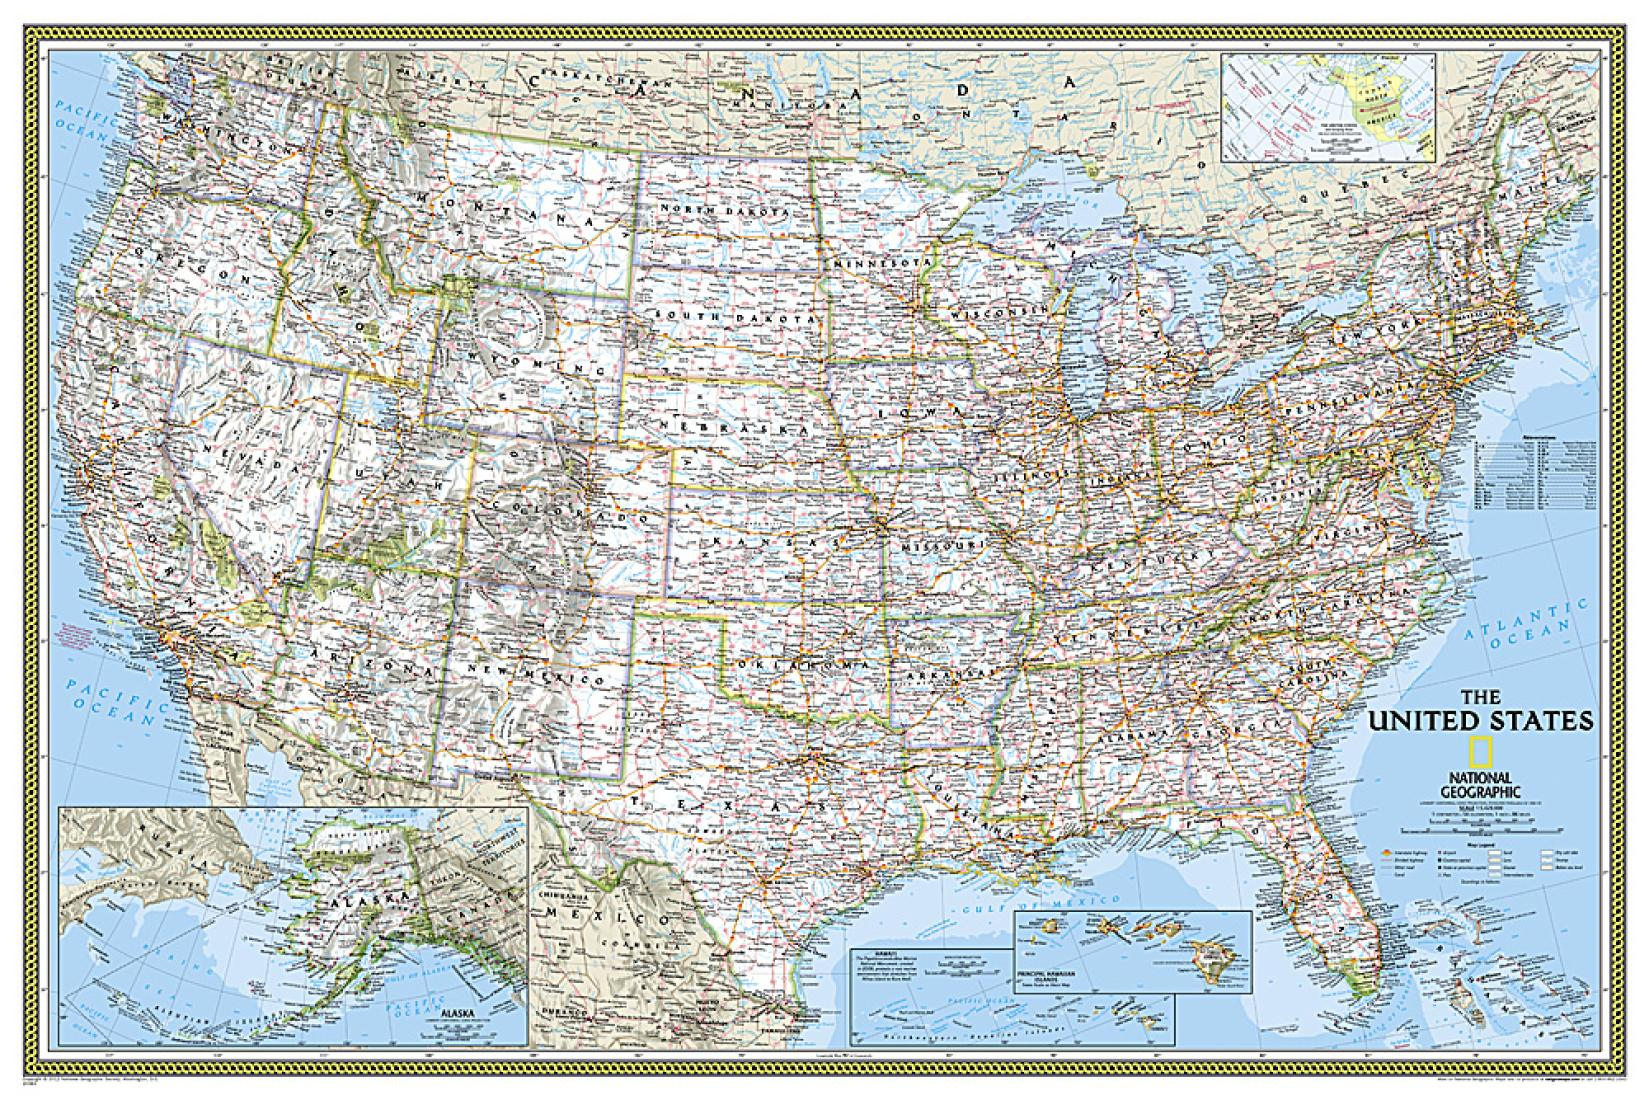 United States Classic Poster sized Sleeved By National Geographic Maps